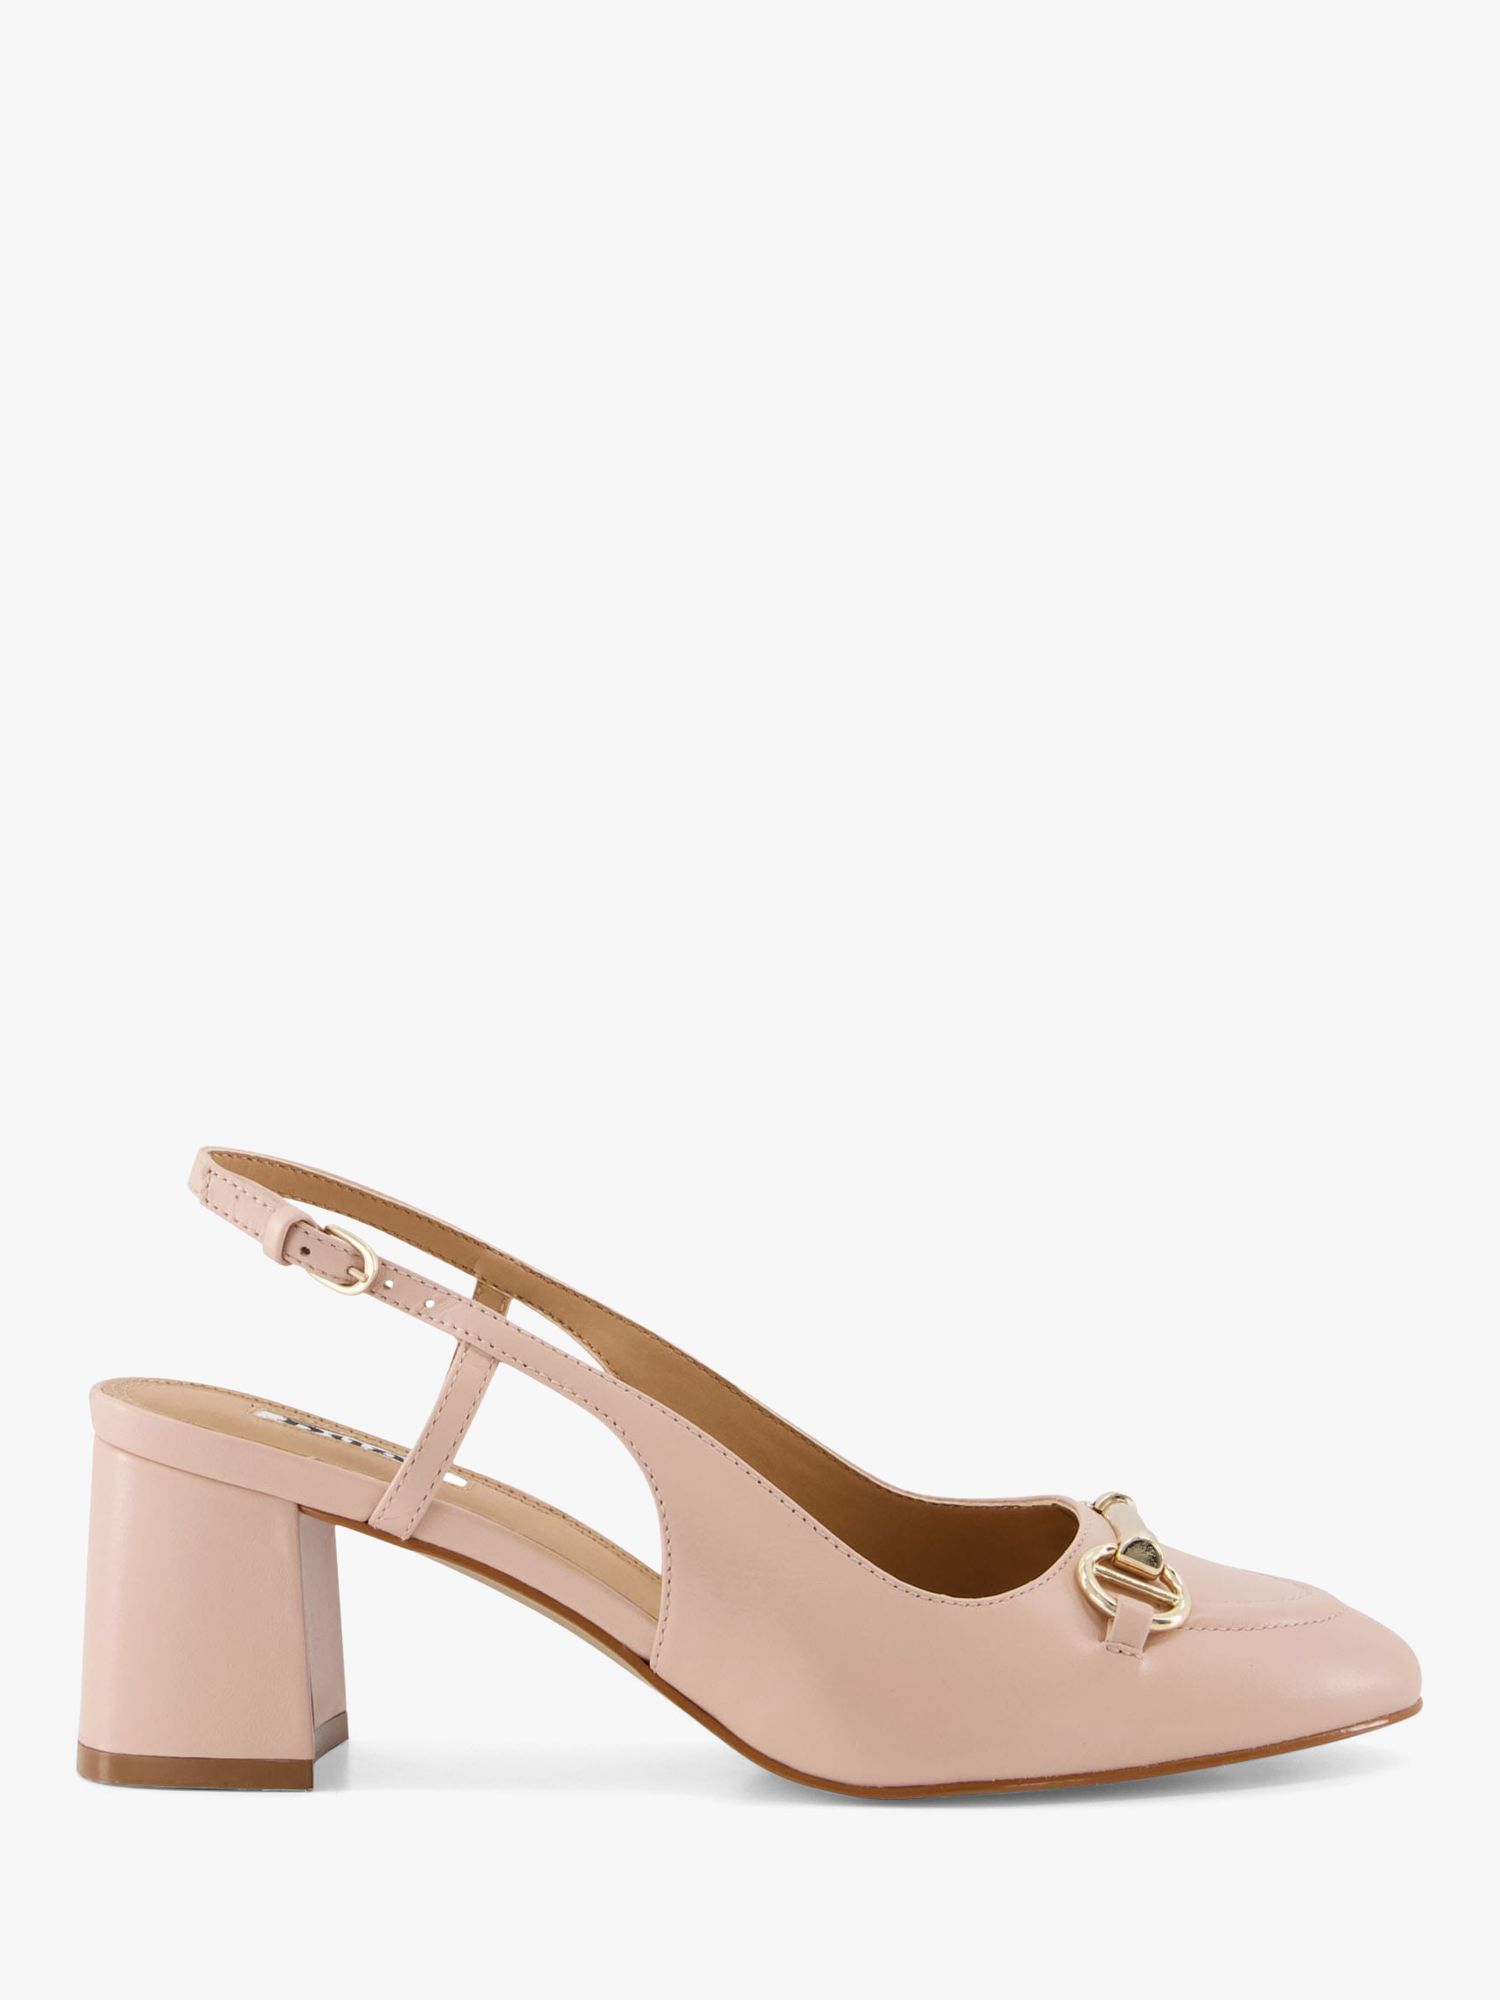 Dune Cassie Leather Slingback Court Shoes, Nude - Top Cheapest Brands